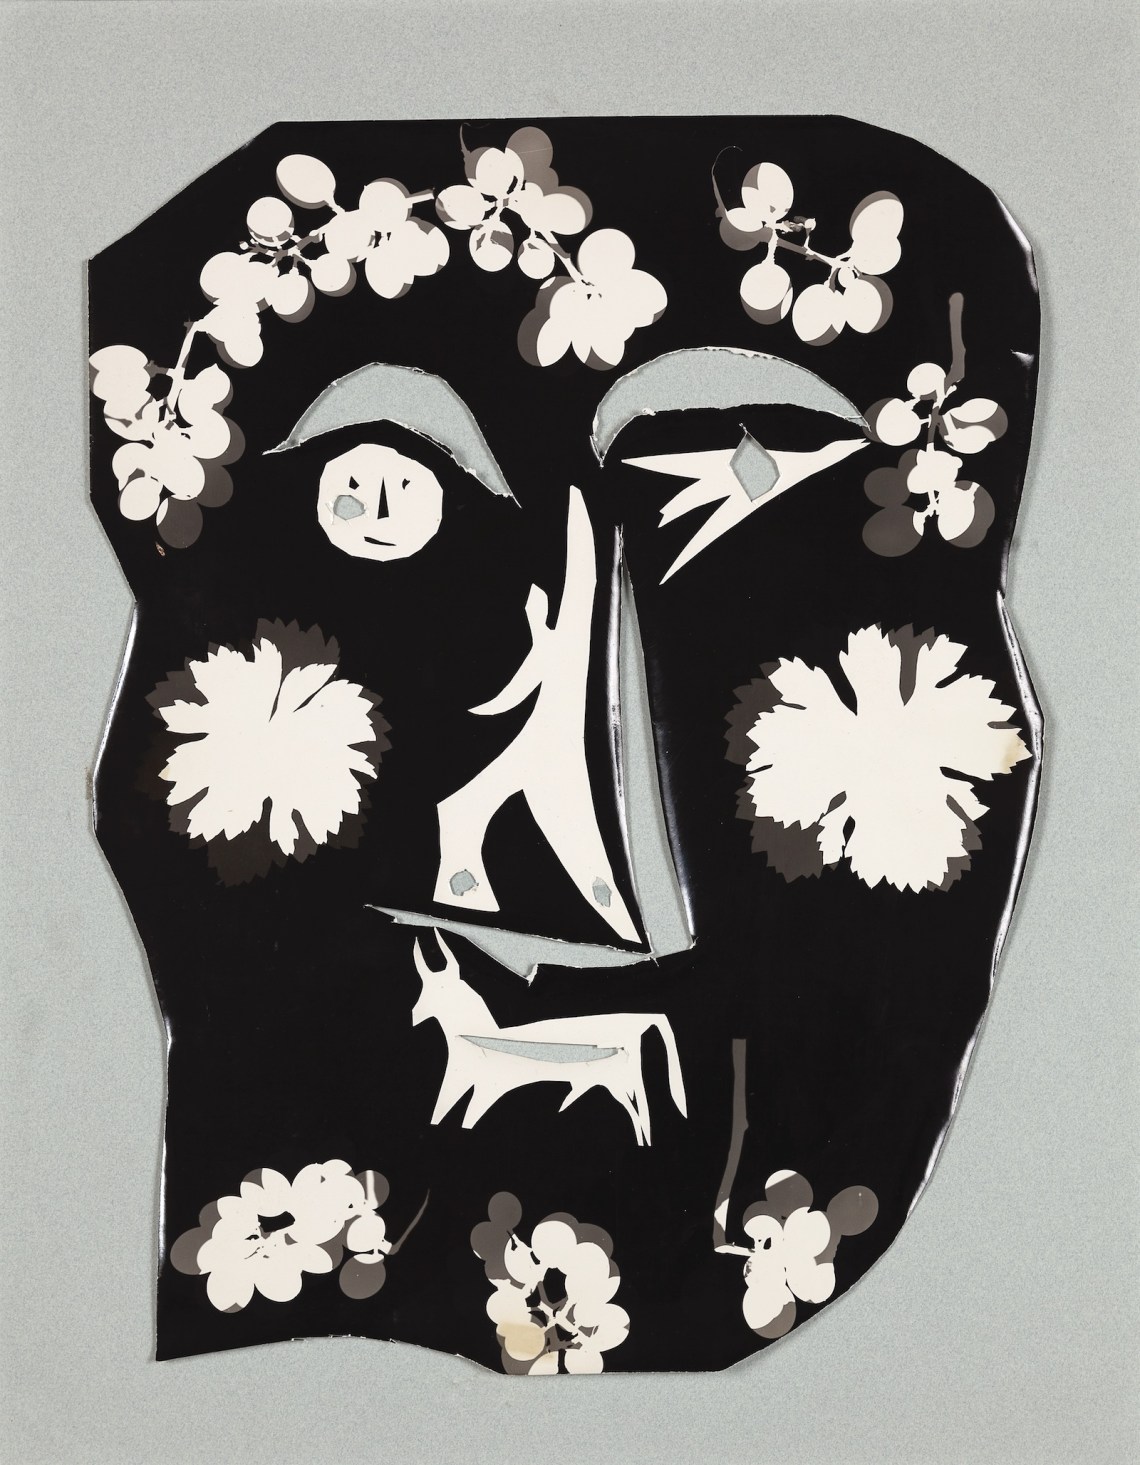 A black mask bedecked with white outlines of flowers, grapes, and animals, with a smiley face for the right eye